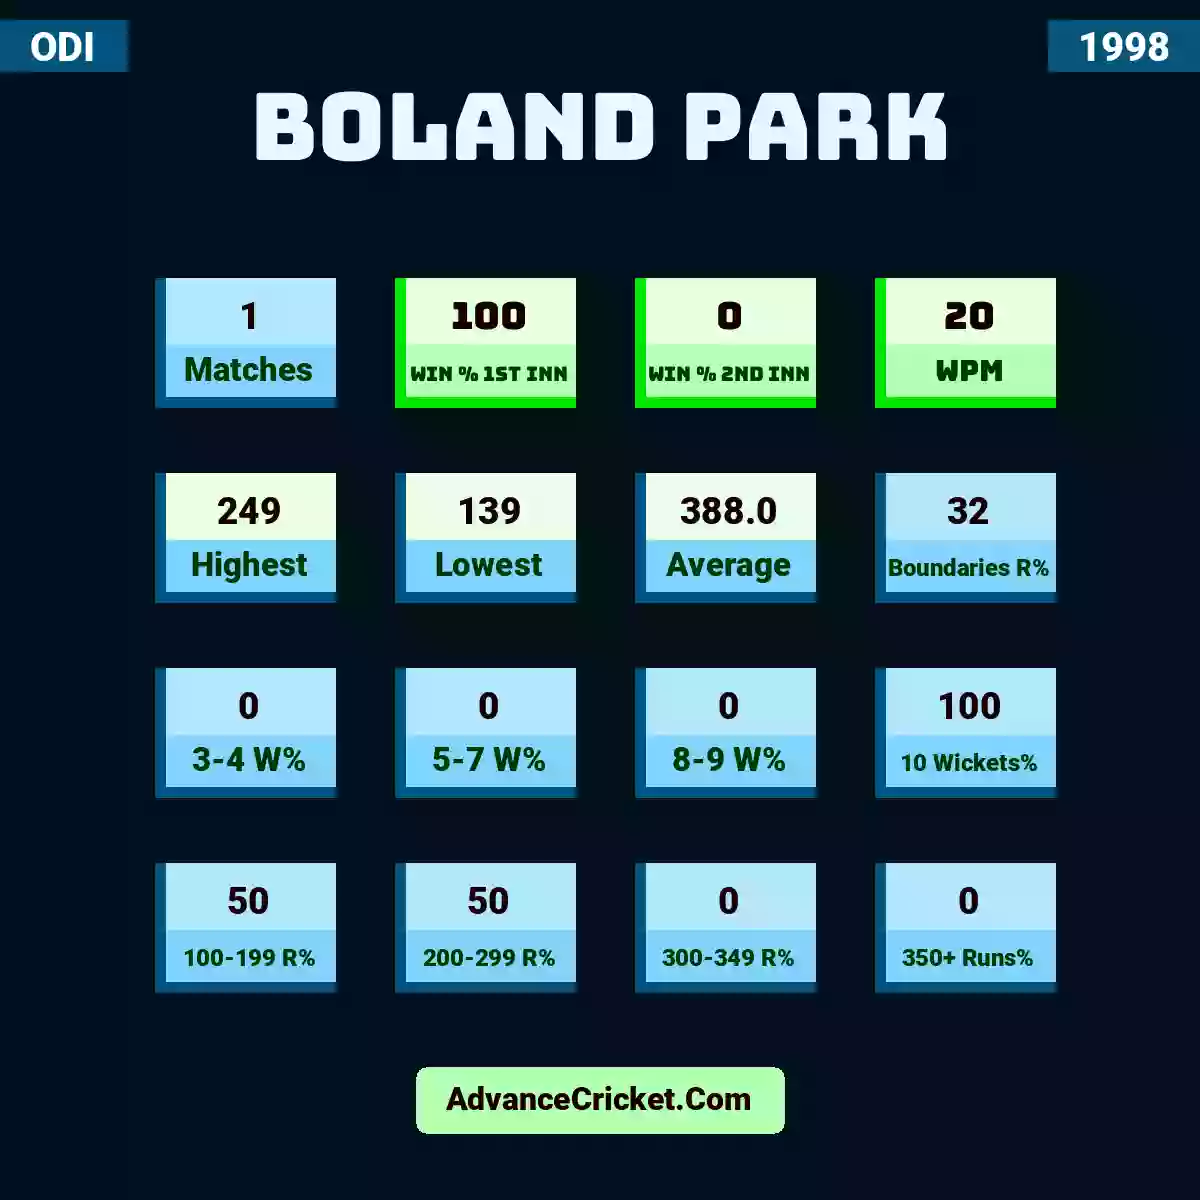 Image showing Boland Park with Matches: 1, Win % 1st Inn: 100, Win % 2nd Inn: 0, WPM: 20, Highest: 249, Lowest: 139, Average: 388.0, Boundaries R%: 32, 3-4 W%: 0, 5-7 W%: 0, 8-9 W%: 0, 10 Wickets%: 100, 100-199 R%: 50, 200-299 R%: 50, 300-349 R%: 0, 350+ Runs%: 0.